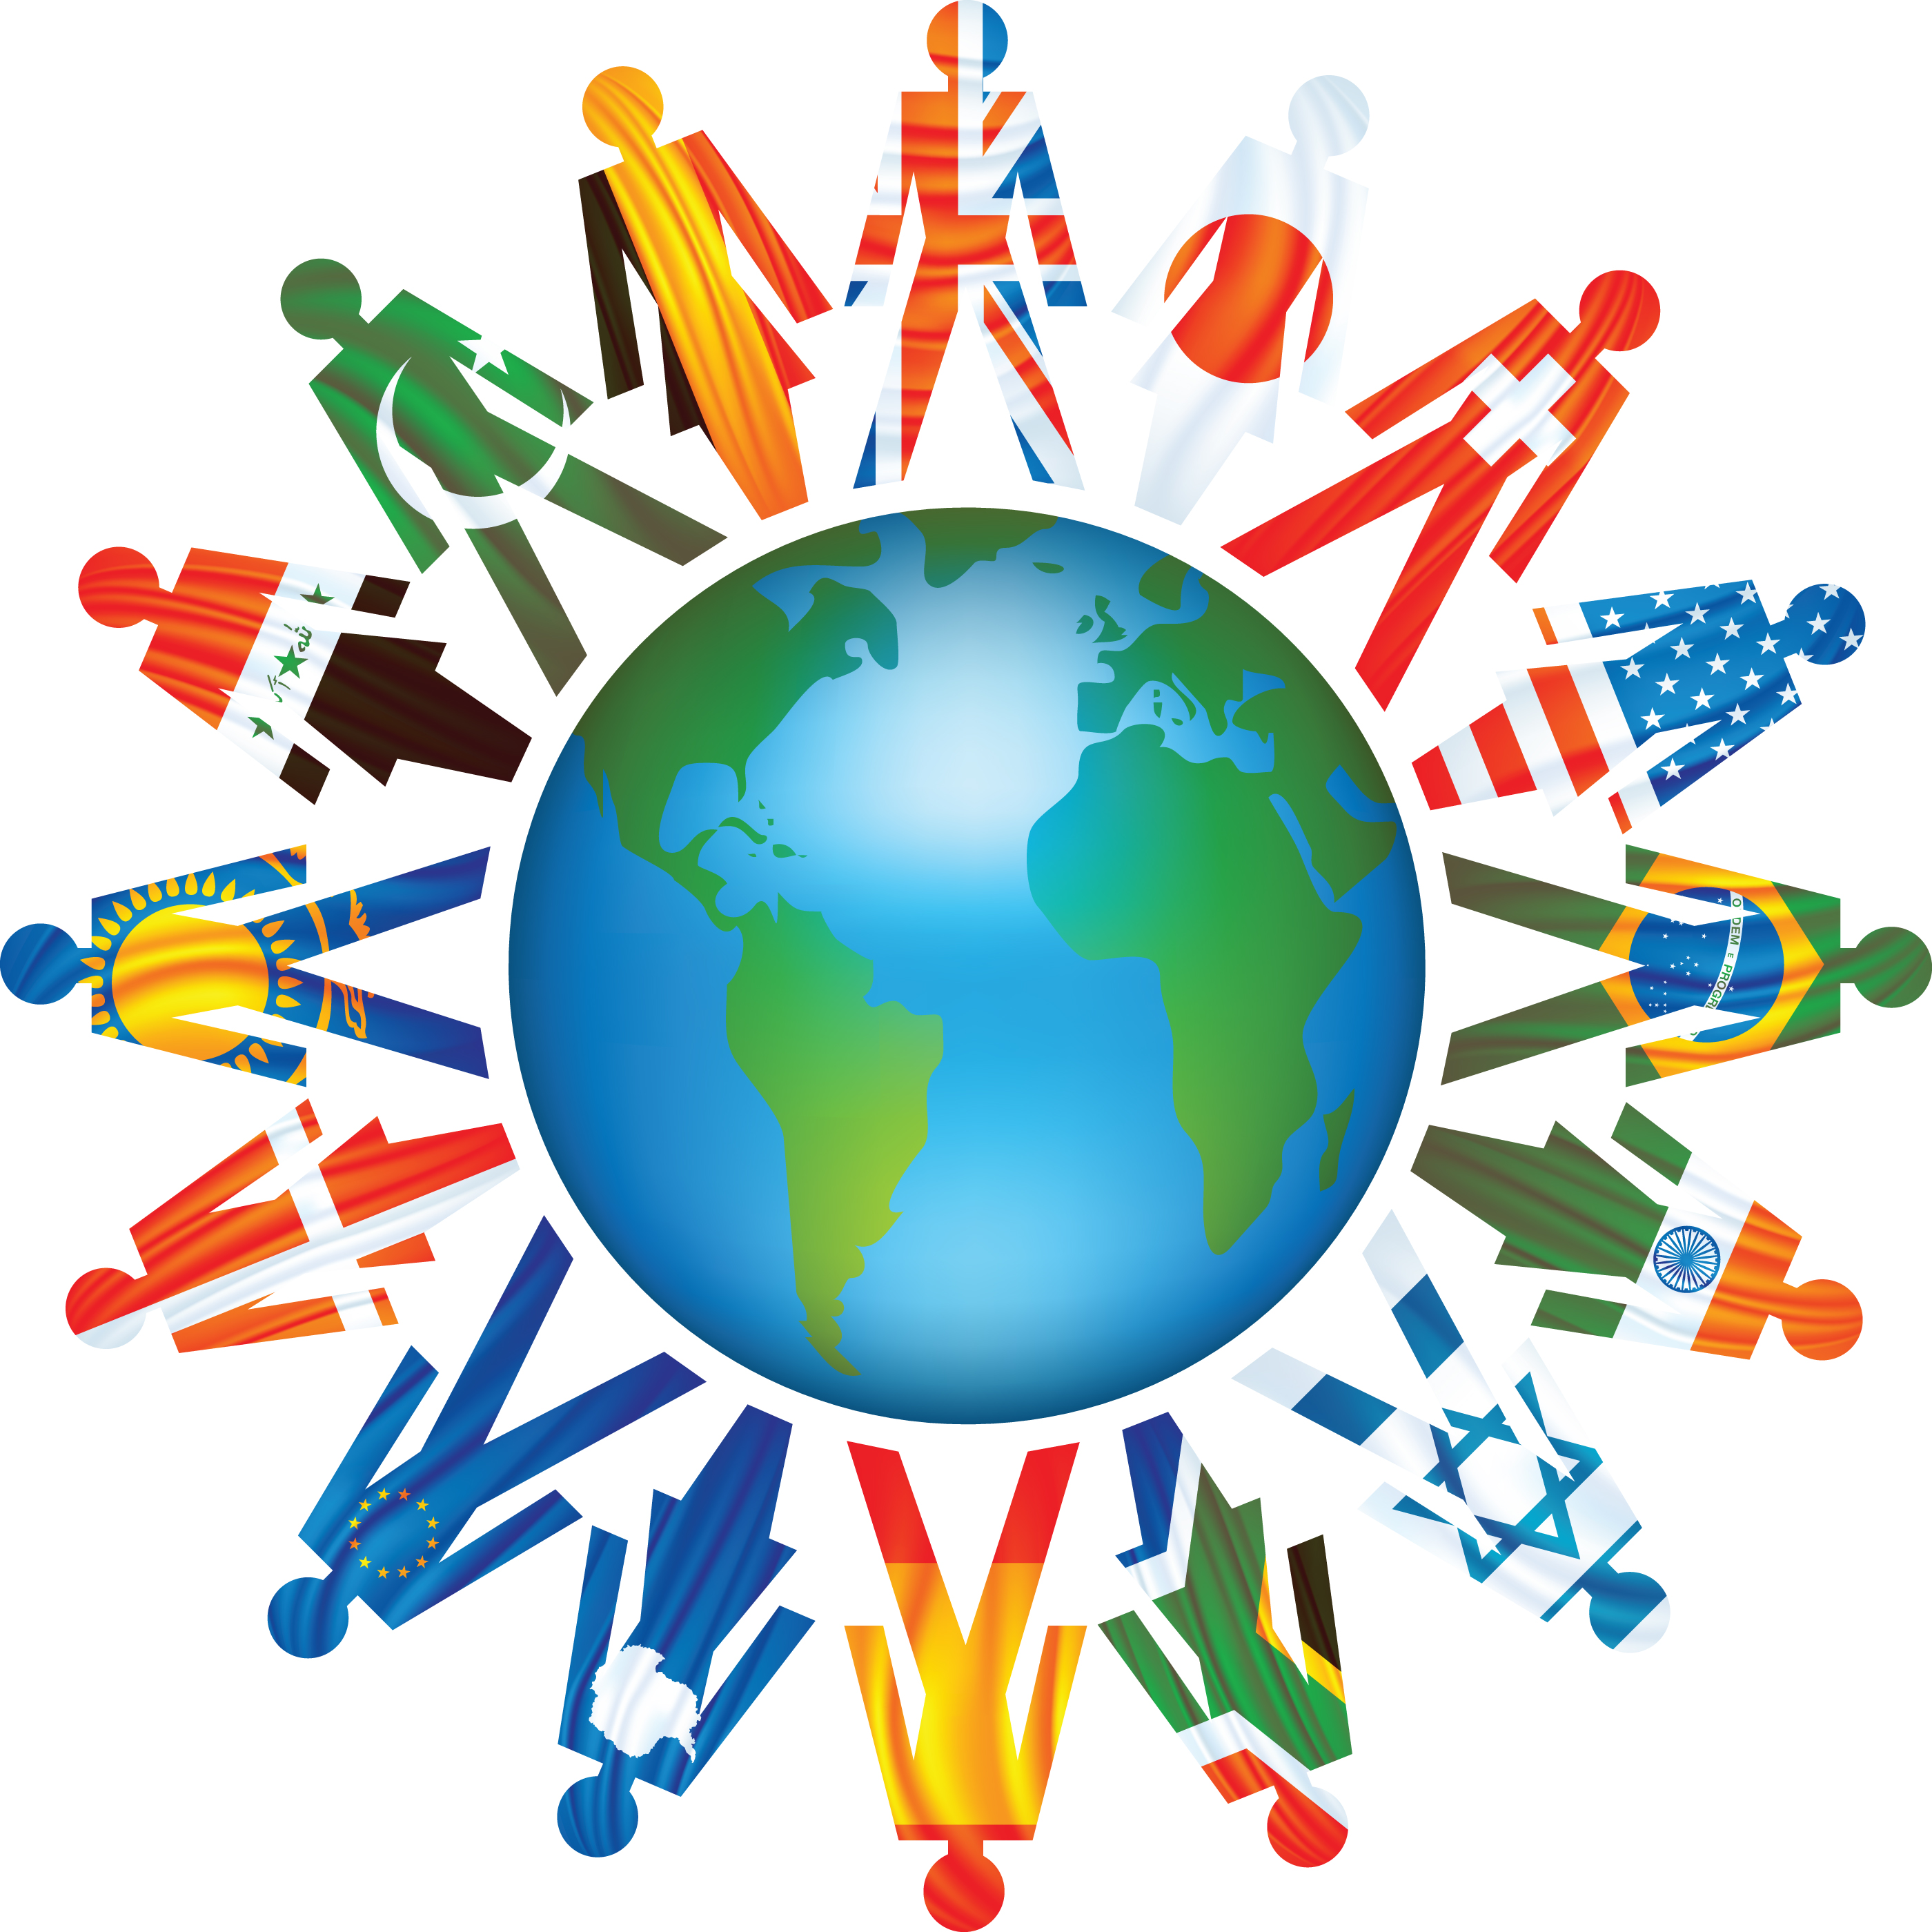 Around The World Clipart craft projects, Symbols Clipart - Clipartoons